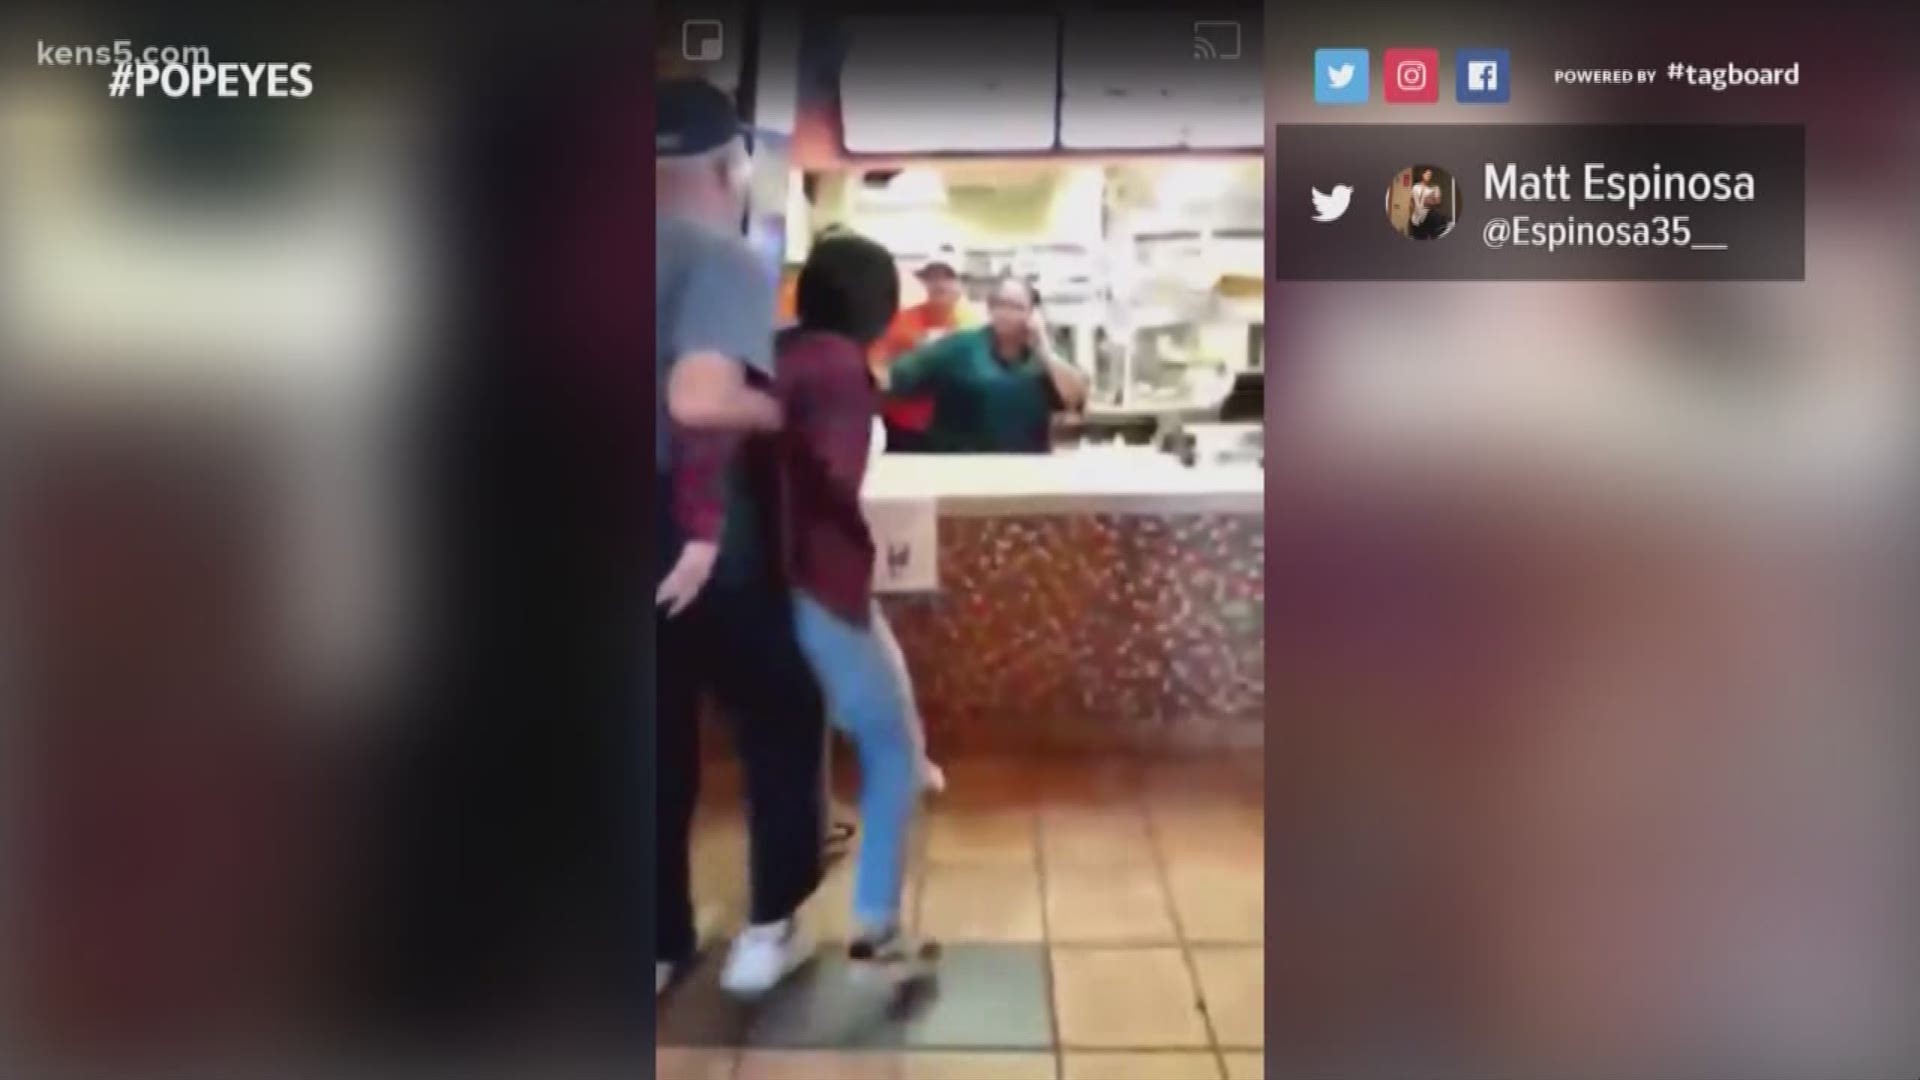 The young woman started to confront employees. In the video, you see an employee chuck a tray at the woman and she throws it right back.